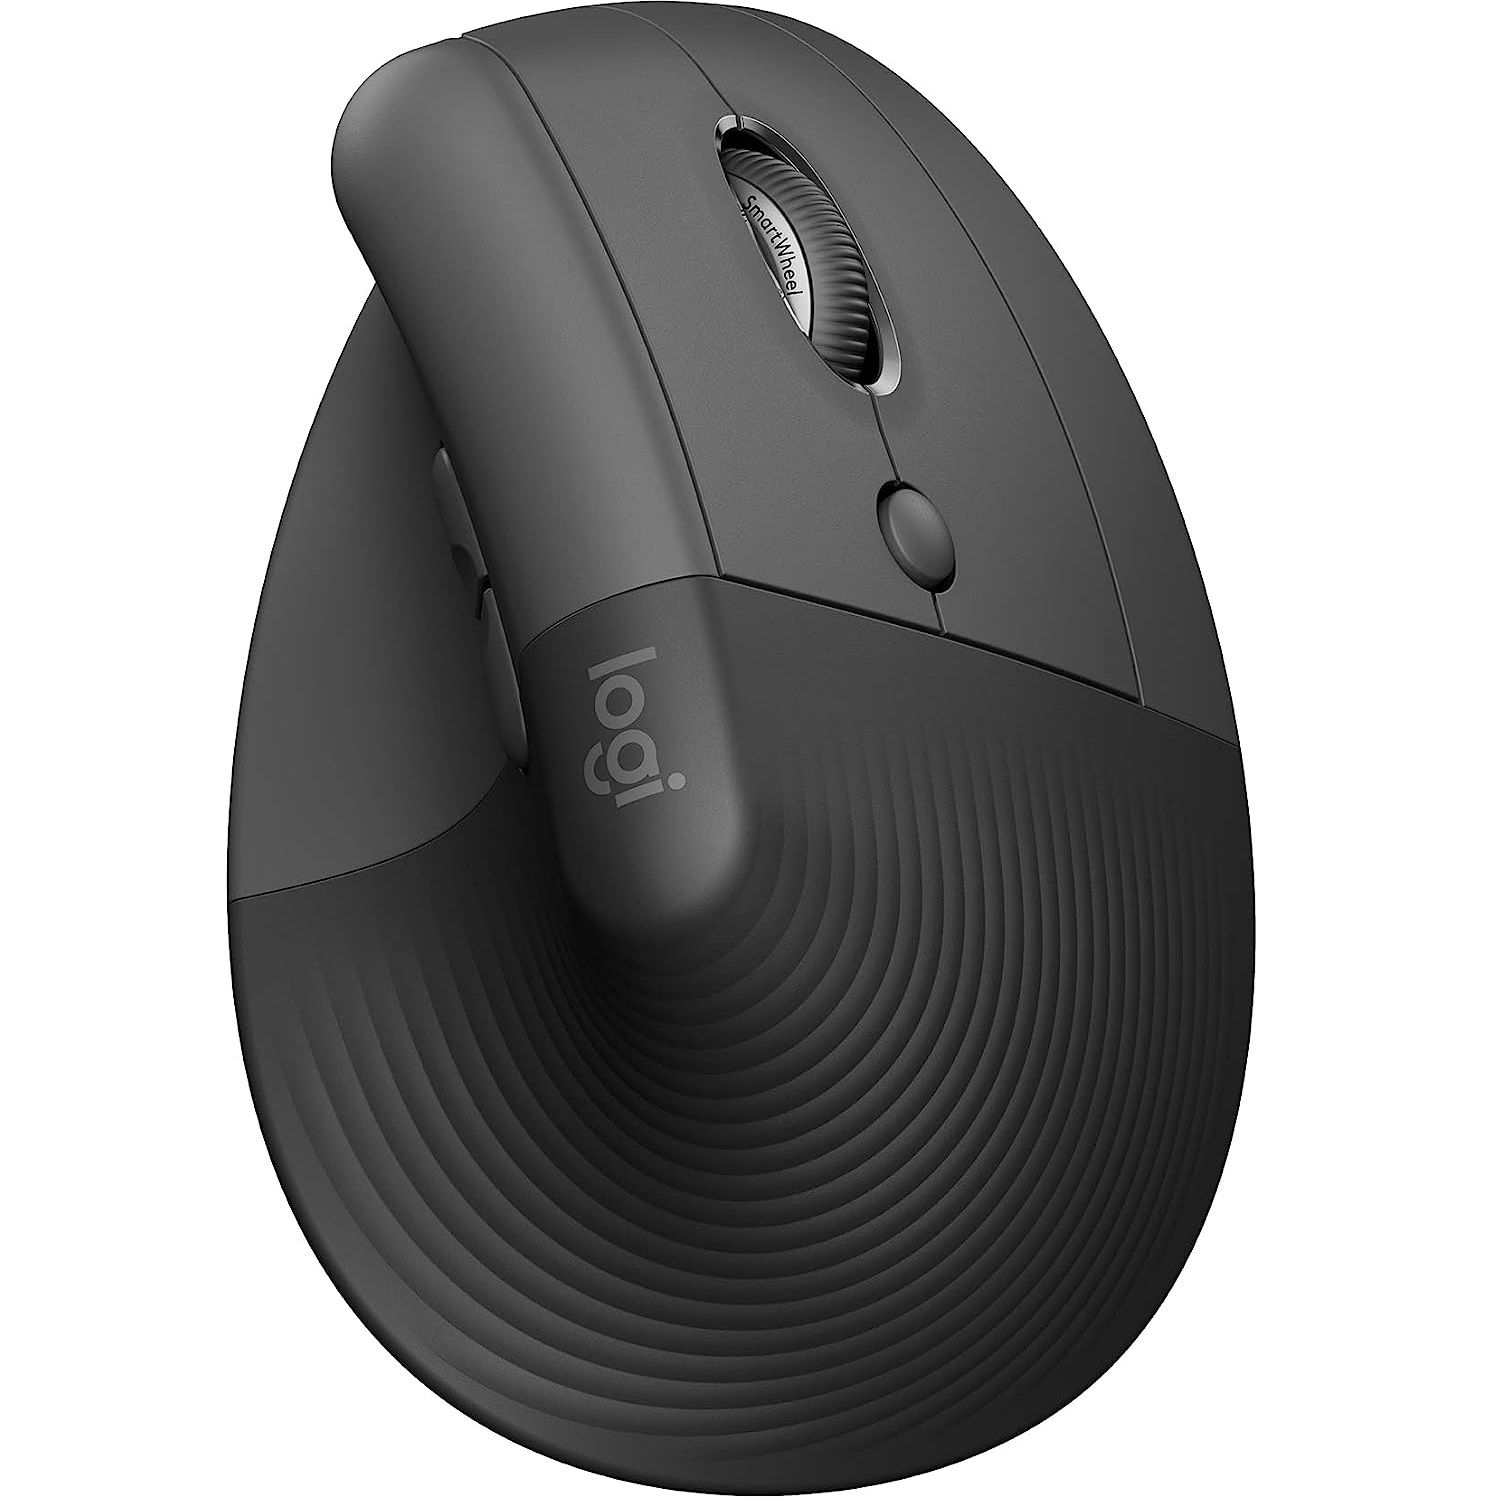 Logitech Lift mouse against a white background